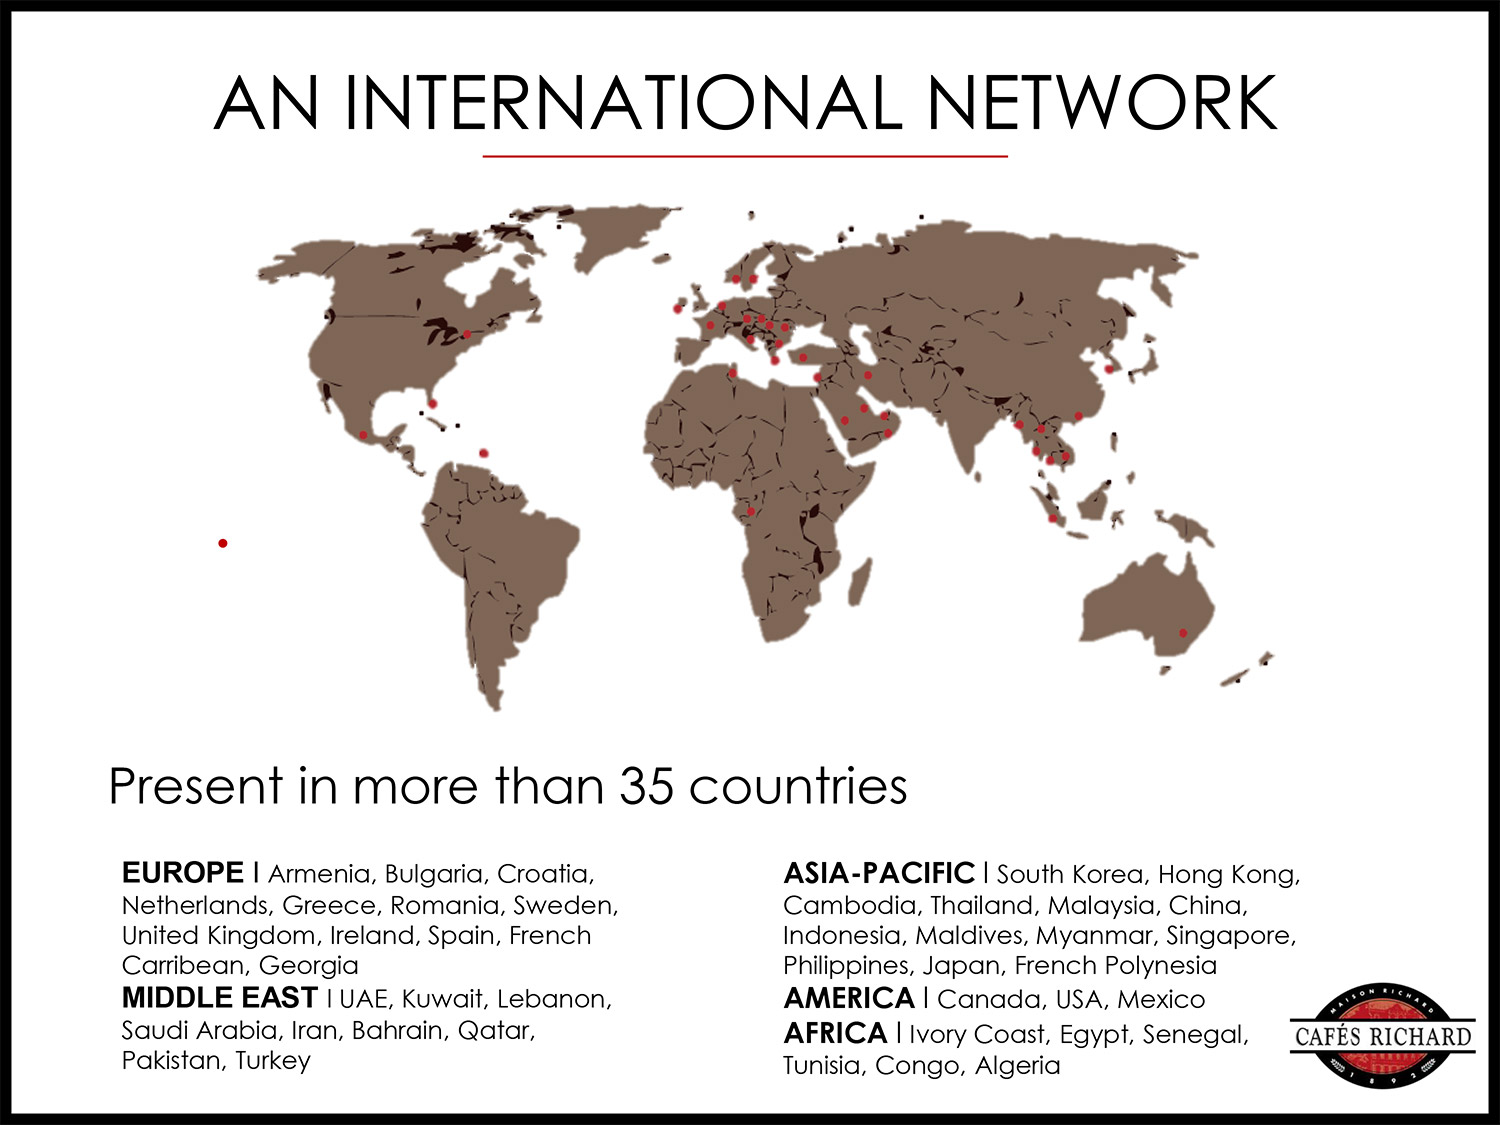 An International network : Europe, Middle East, Asia-Pacific, America and Africa